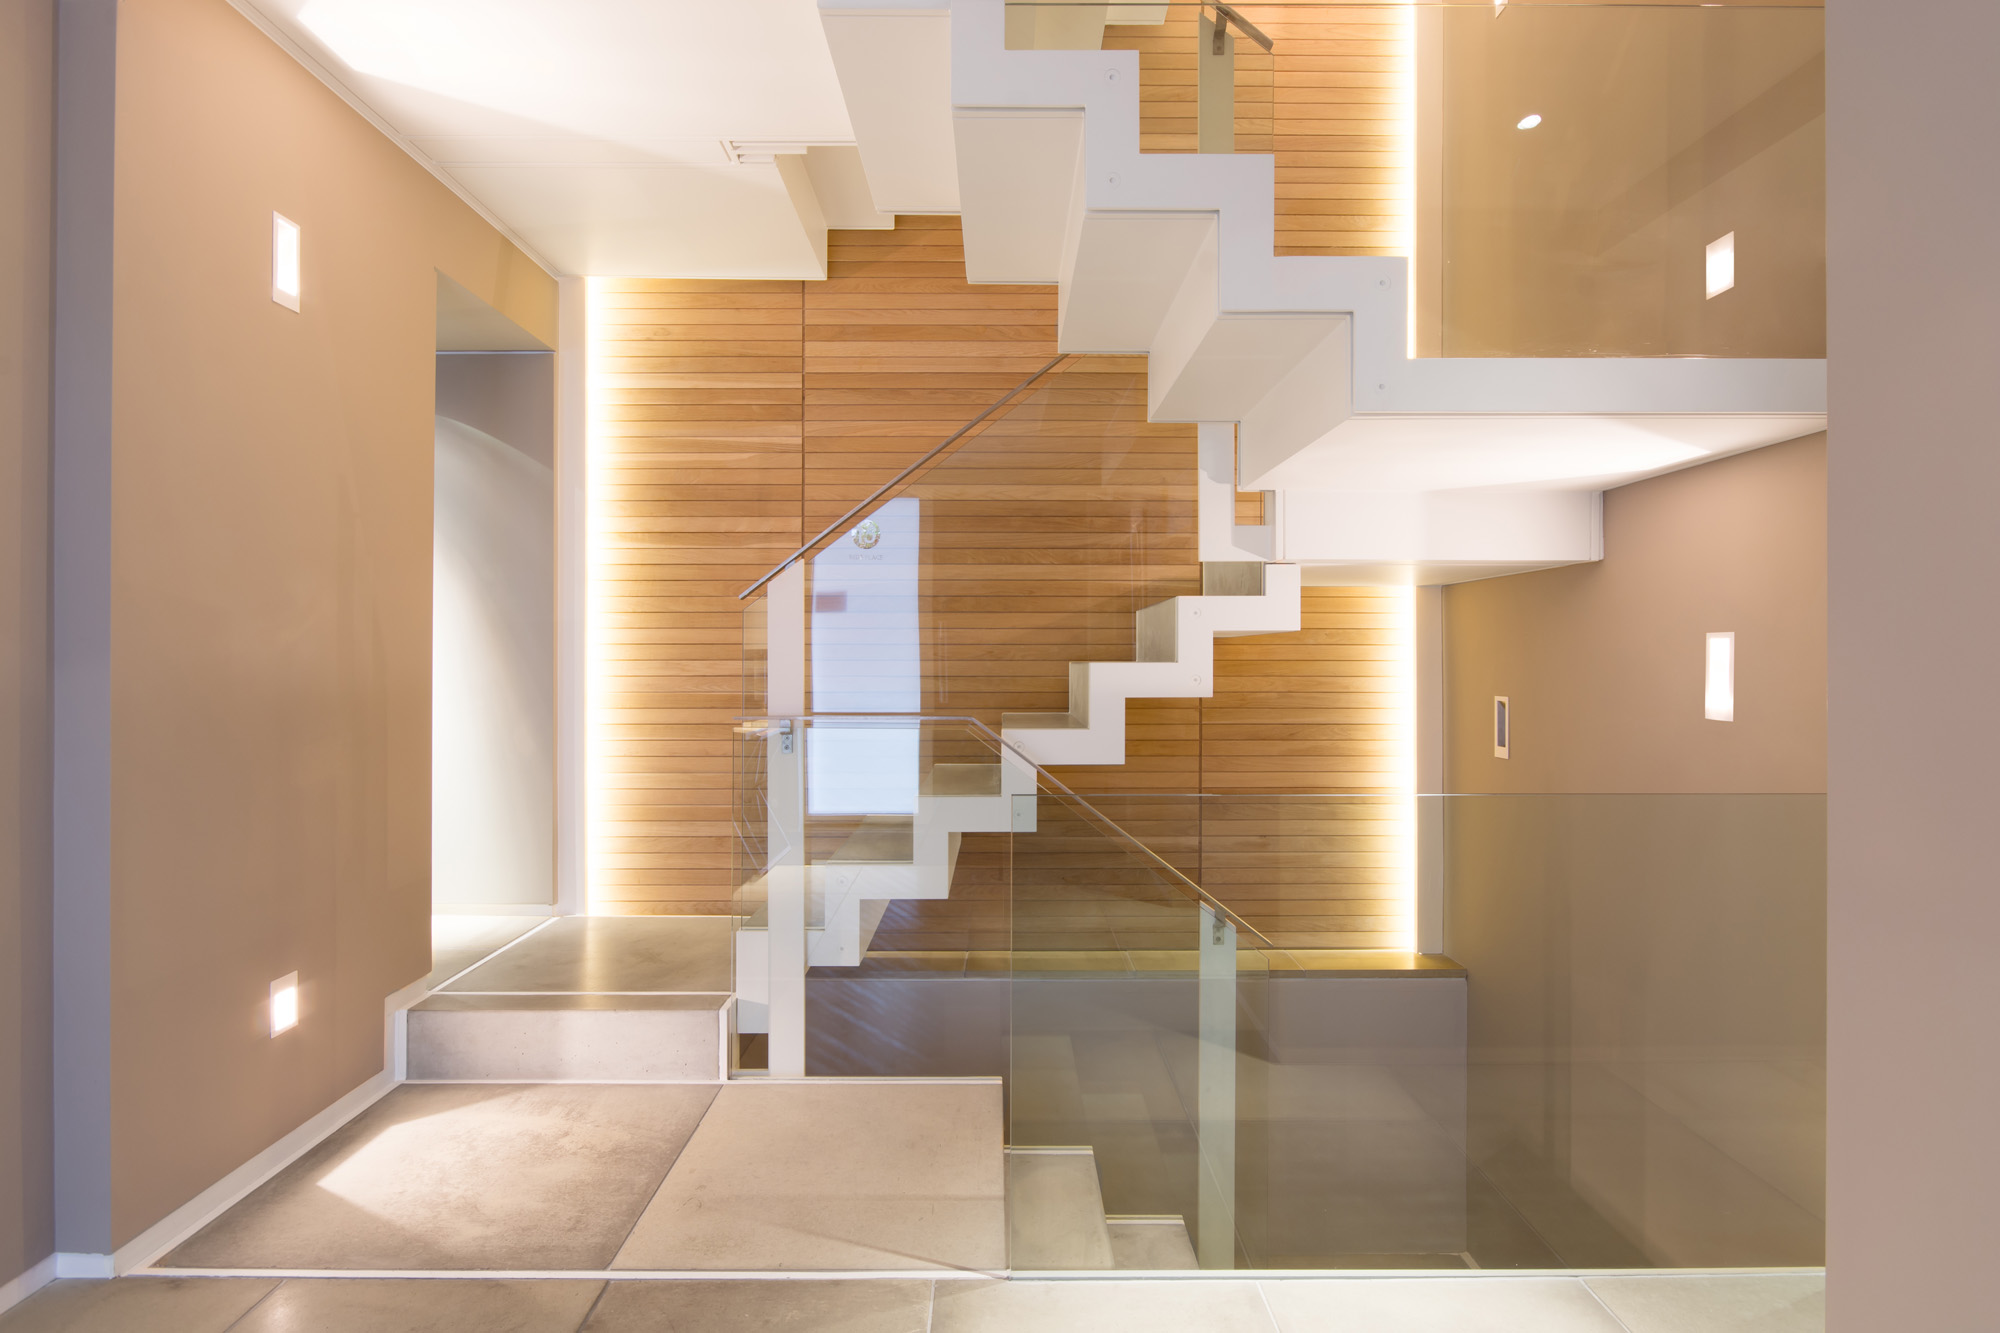 For Sale: Rede Place Notting Hill W11 architectural spiral staircase